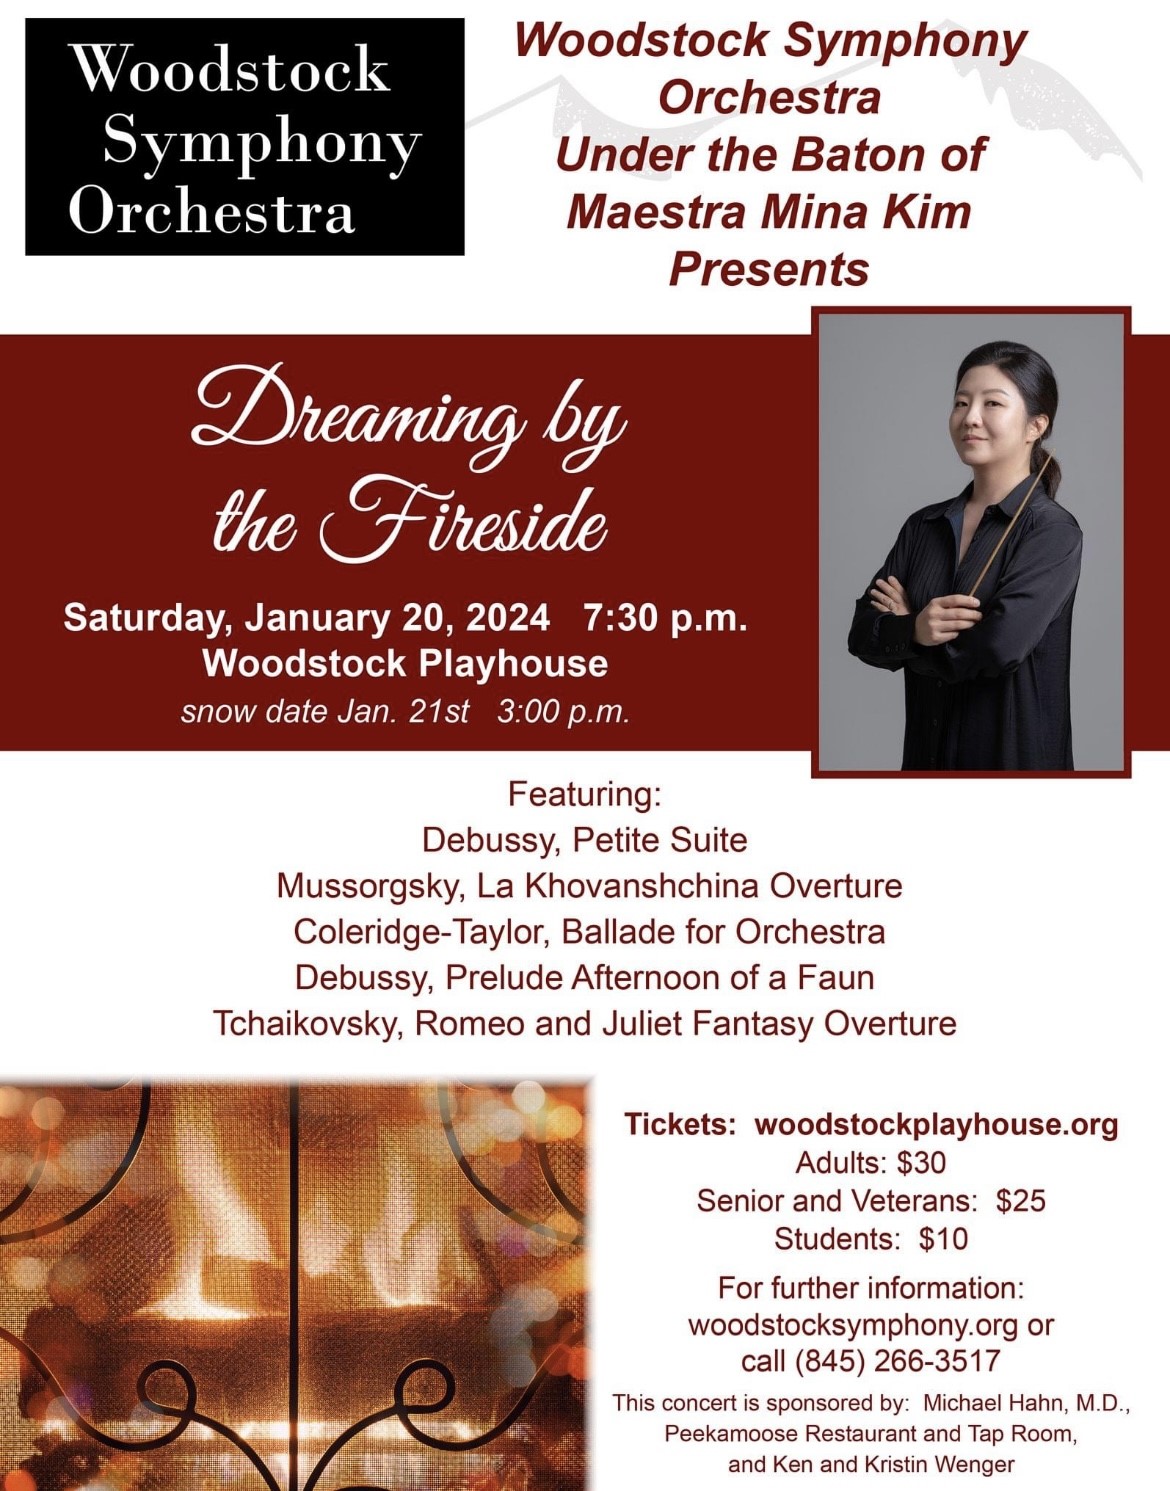 Woodstock Symphony Orchestra Concert: Dreaming by the Fireside